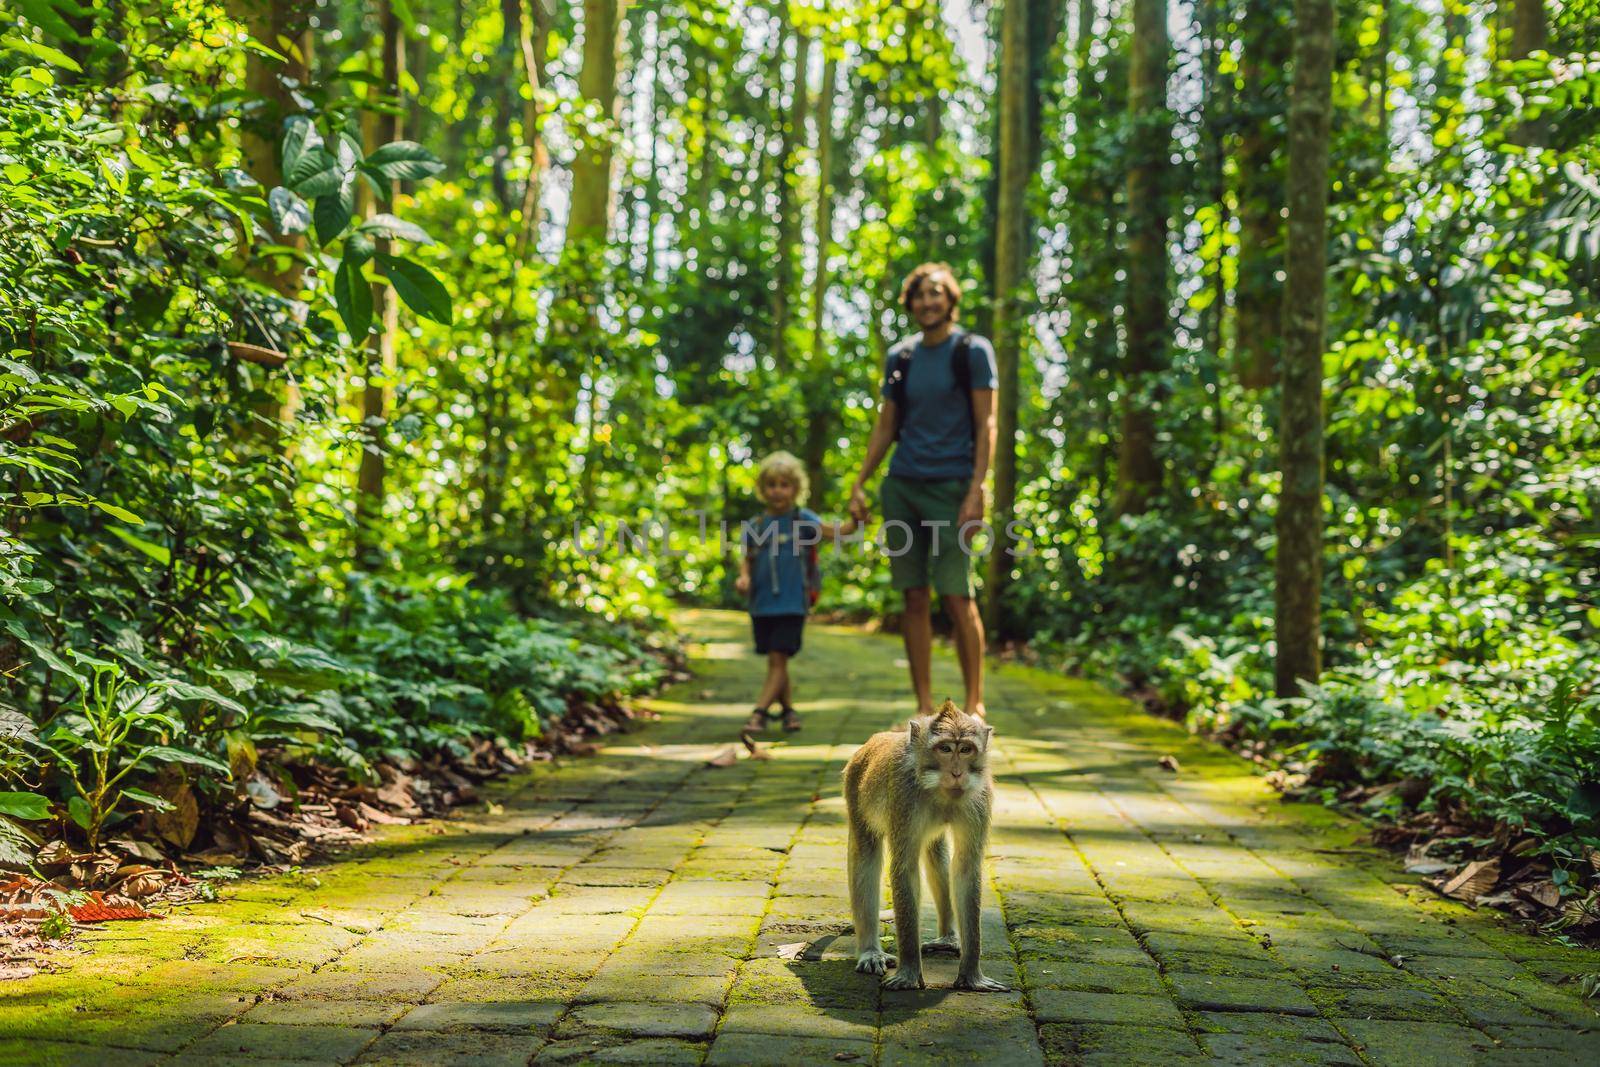 Dad and son travelers discovering Ubud forest in Monkey forest, Bali Indonesia. Traveling with children concept.